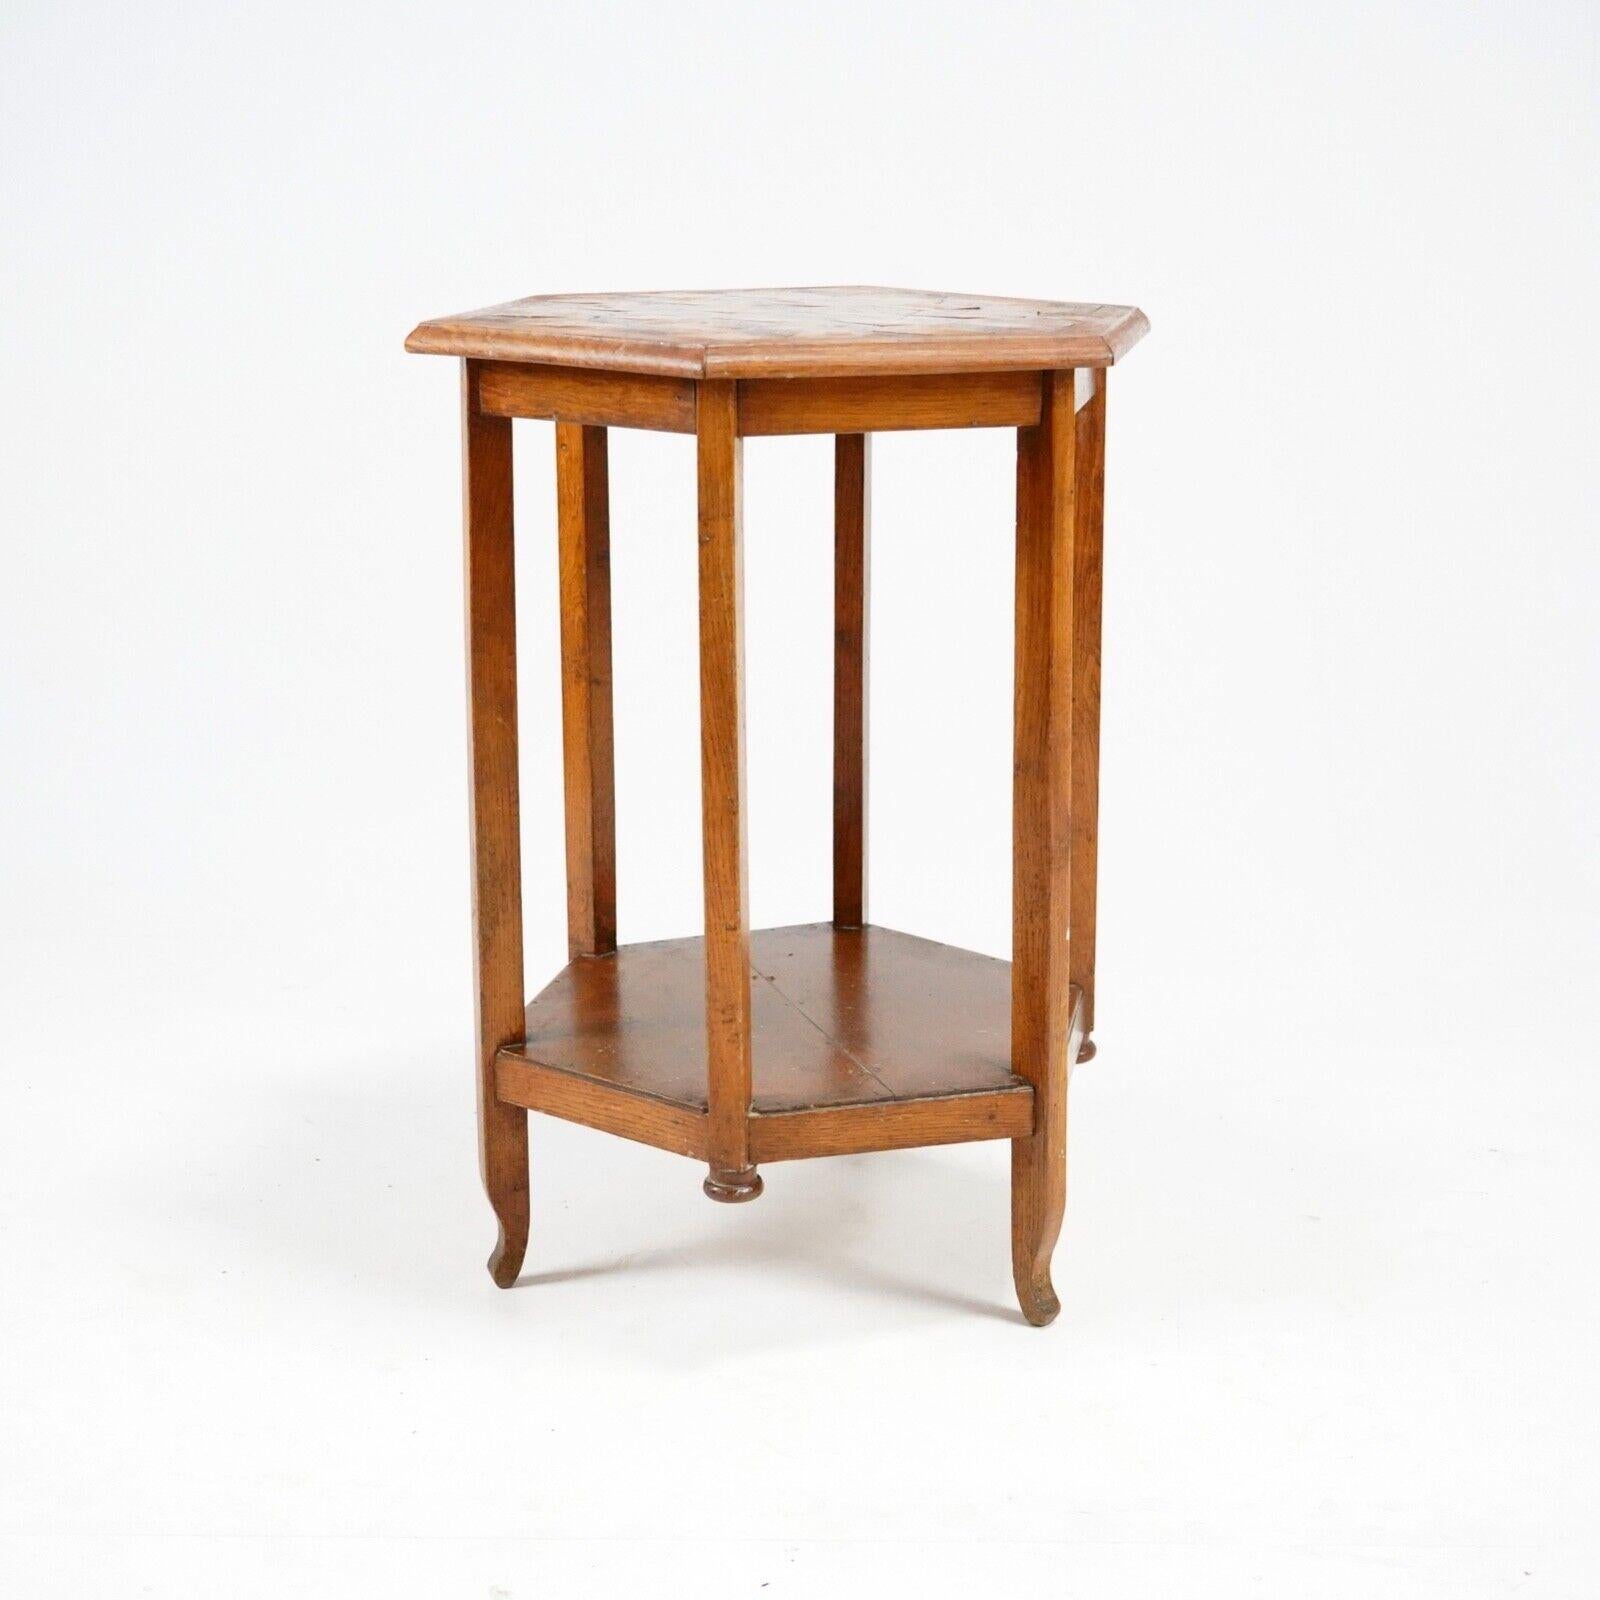 19th Century Antique Oak Hexagonal Cubist Parquetry Top Side Table - Country House For Sale